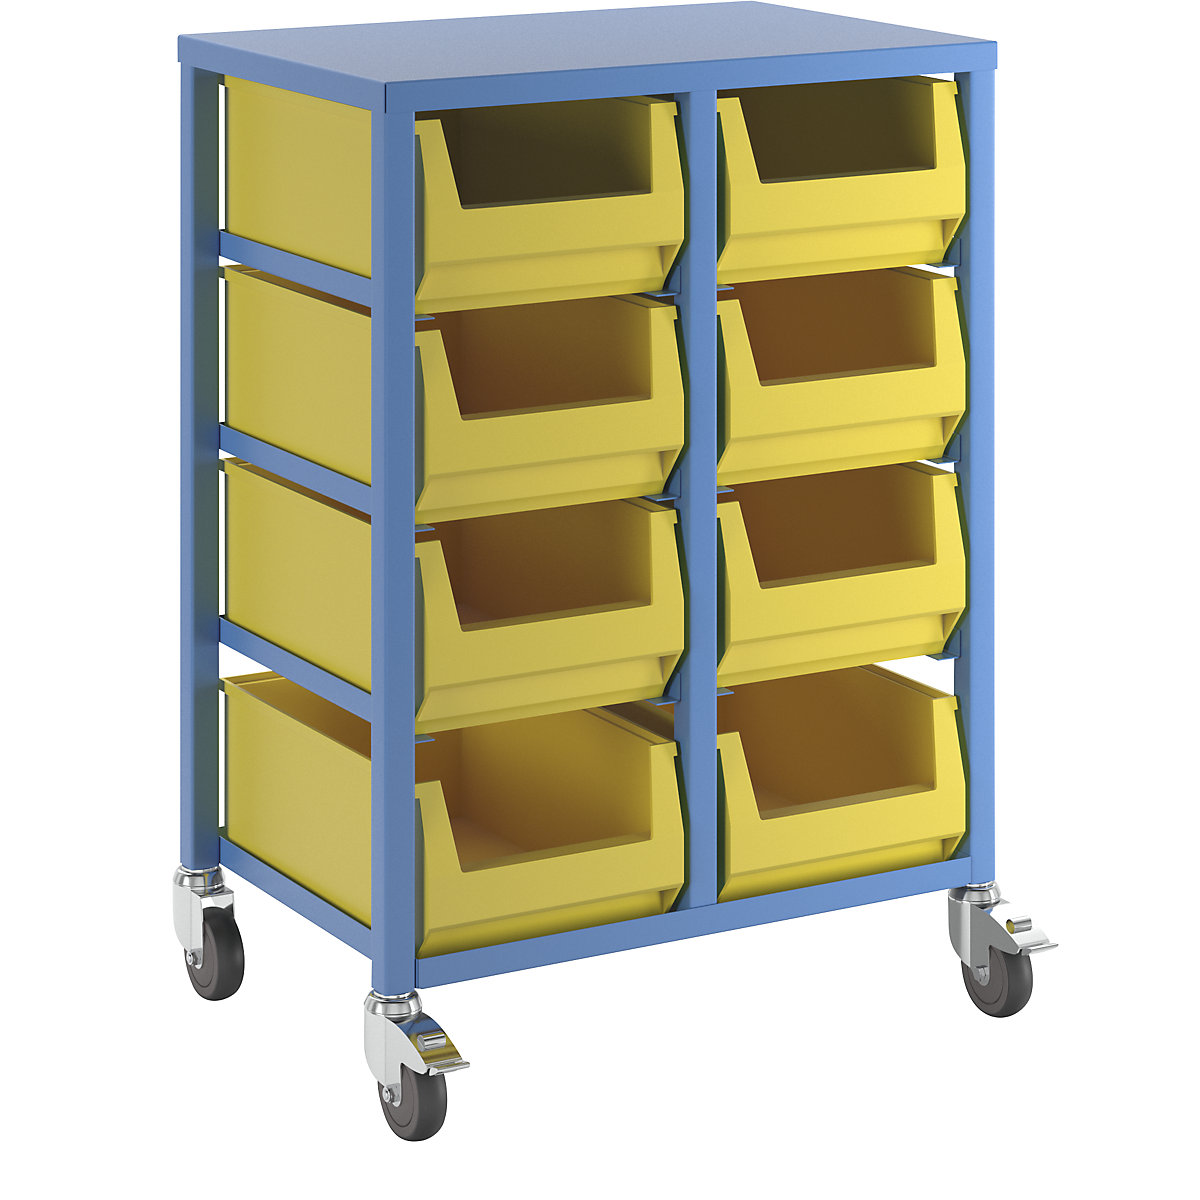 Order picking trolley – eurokraft pro, light blue RAL 5012, height 1050 mm, with 8 x 23 litre plastic containers-10